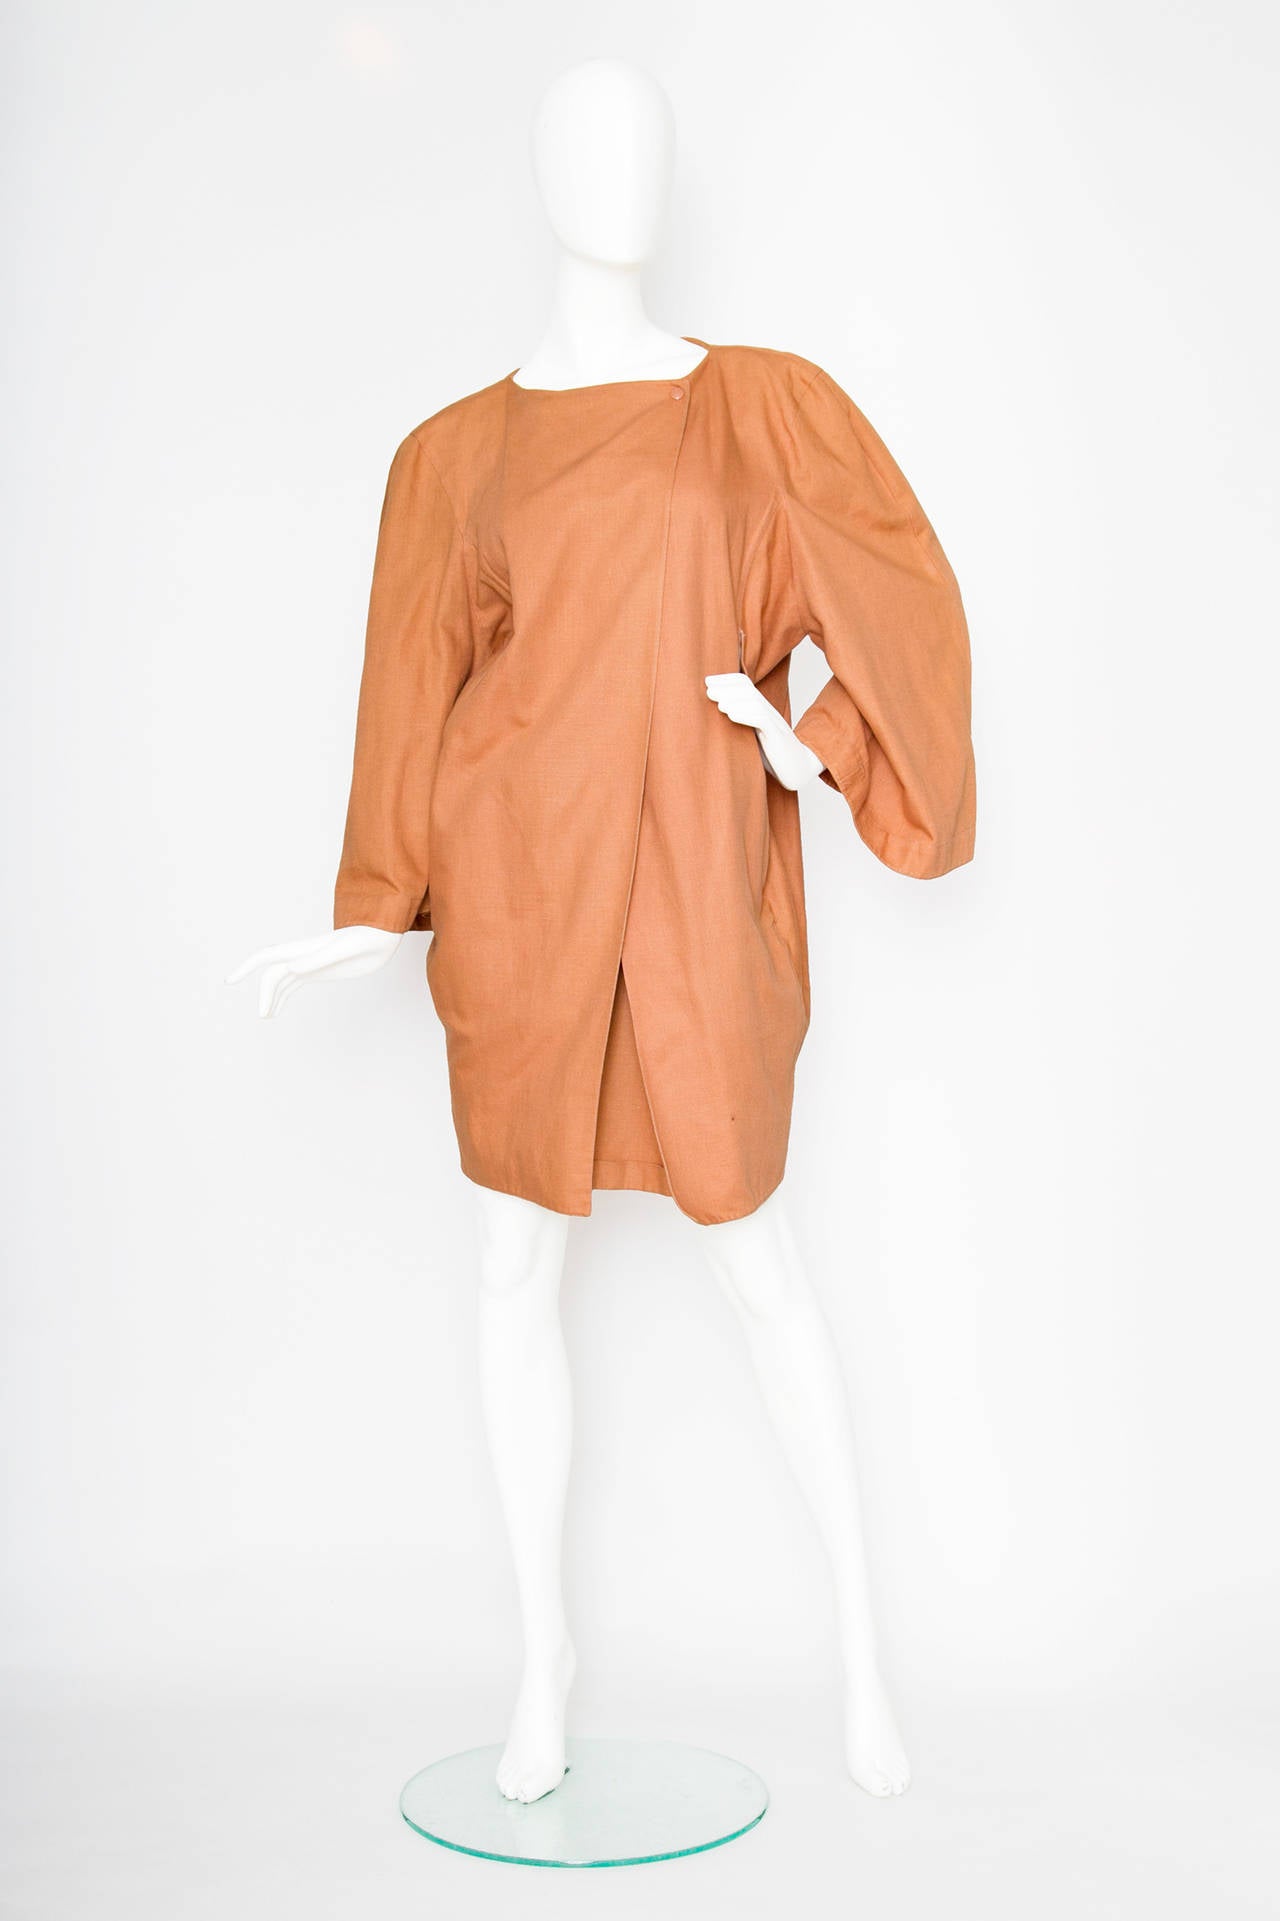 A 1980s Claude Montana orange linen jacket and short ensemble. The jacket has an oversized fit and rounded shoulders with wide sleeves. The jacket has a round neckline and closes in the front with a cross body closure fastened with a push button and